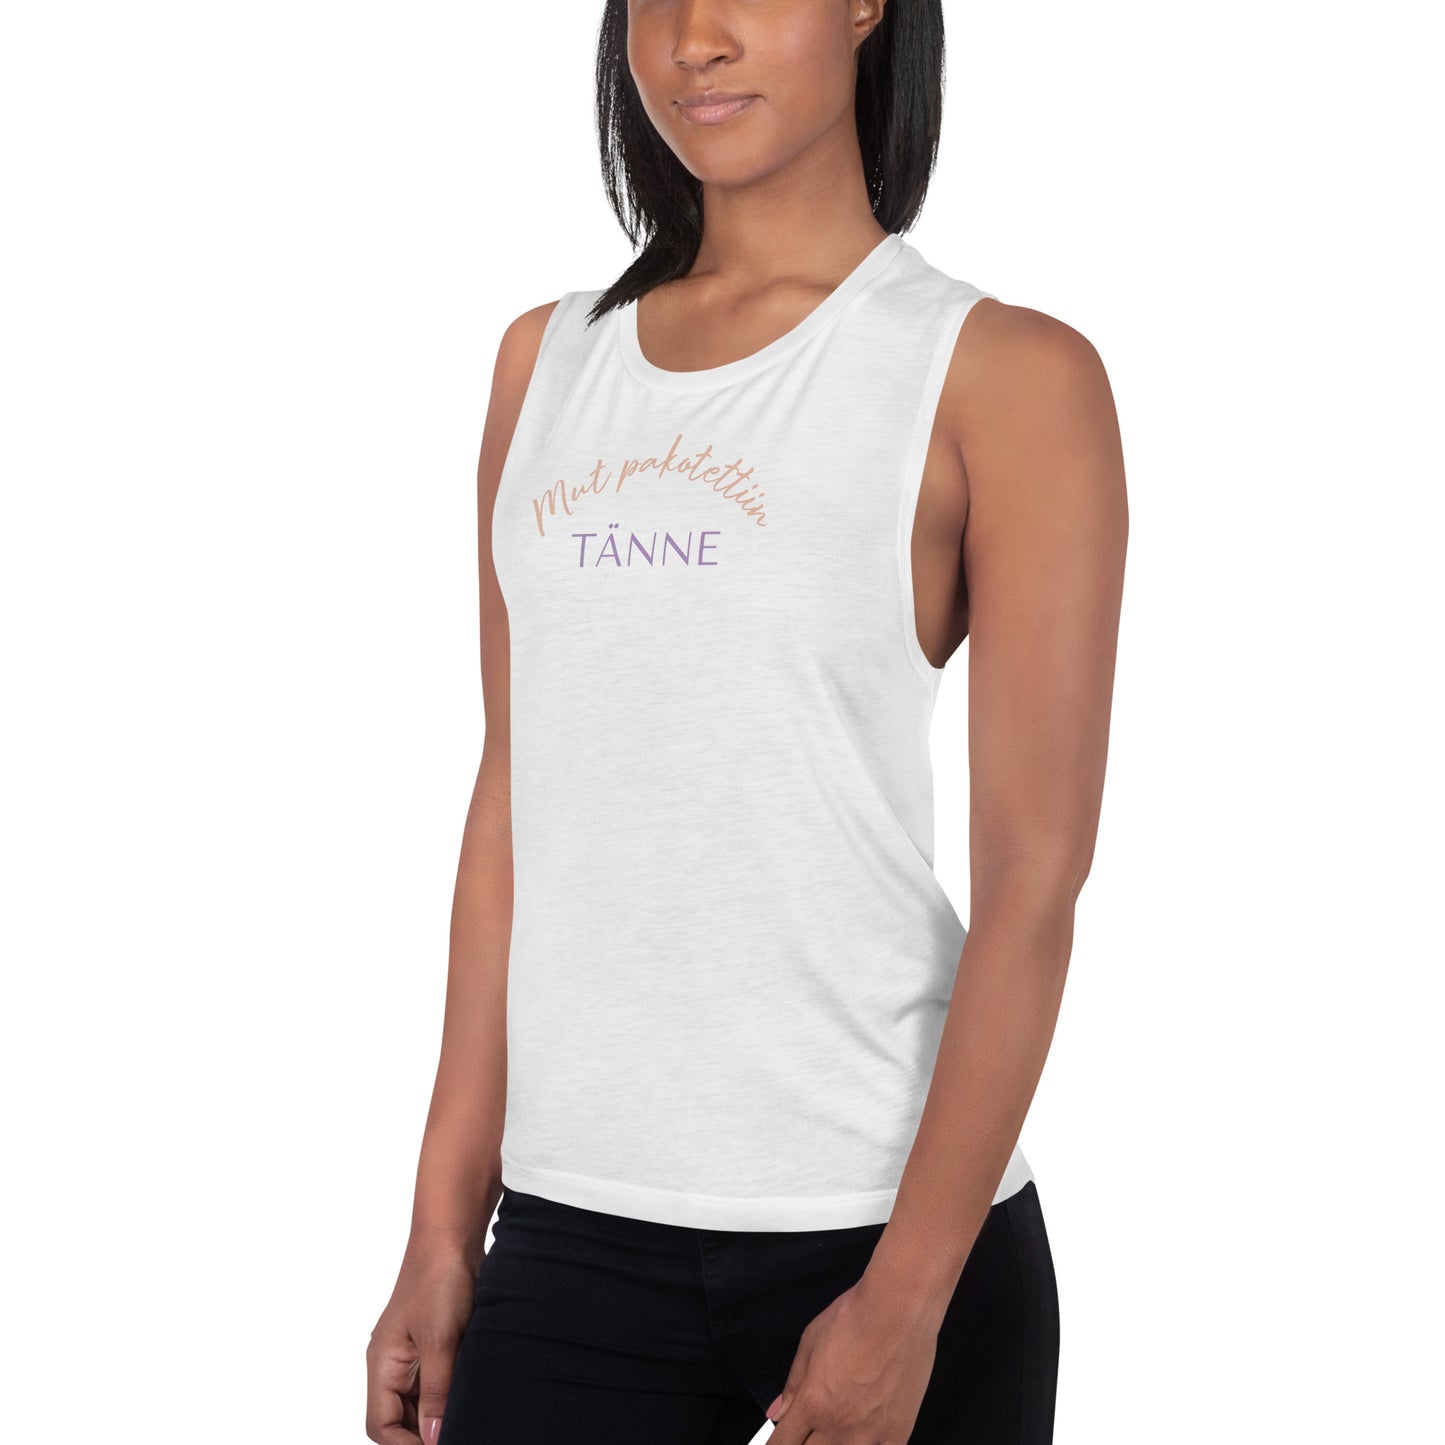 "But I was forced" women's sleeveless shirt (customer's request)